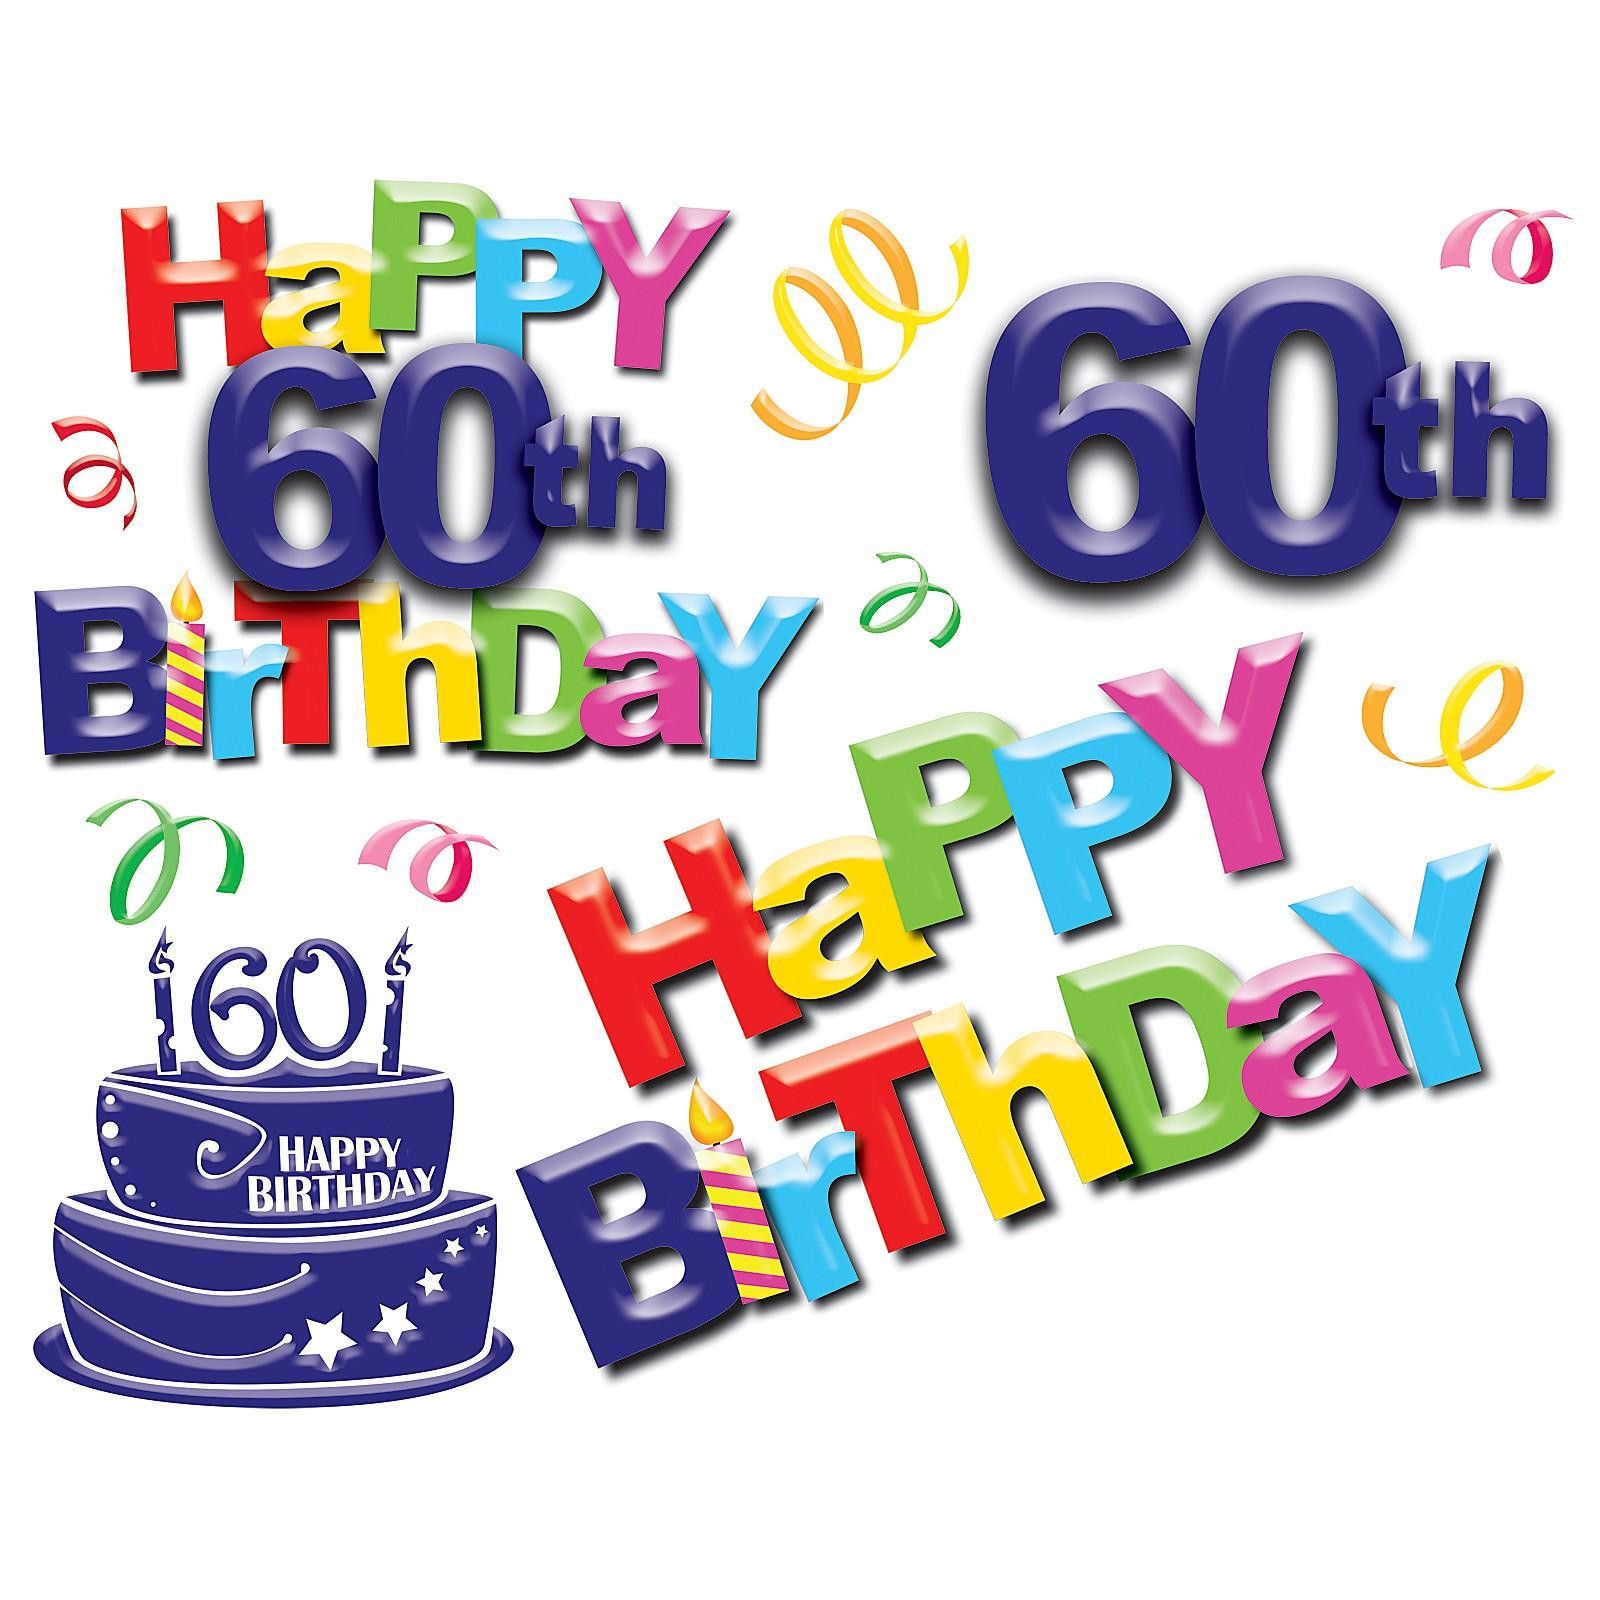 60th Birthday Wishes Funny
 100 60th Birthday Wishes Special Quotes Messages